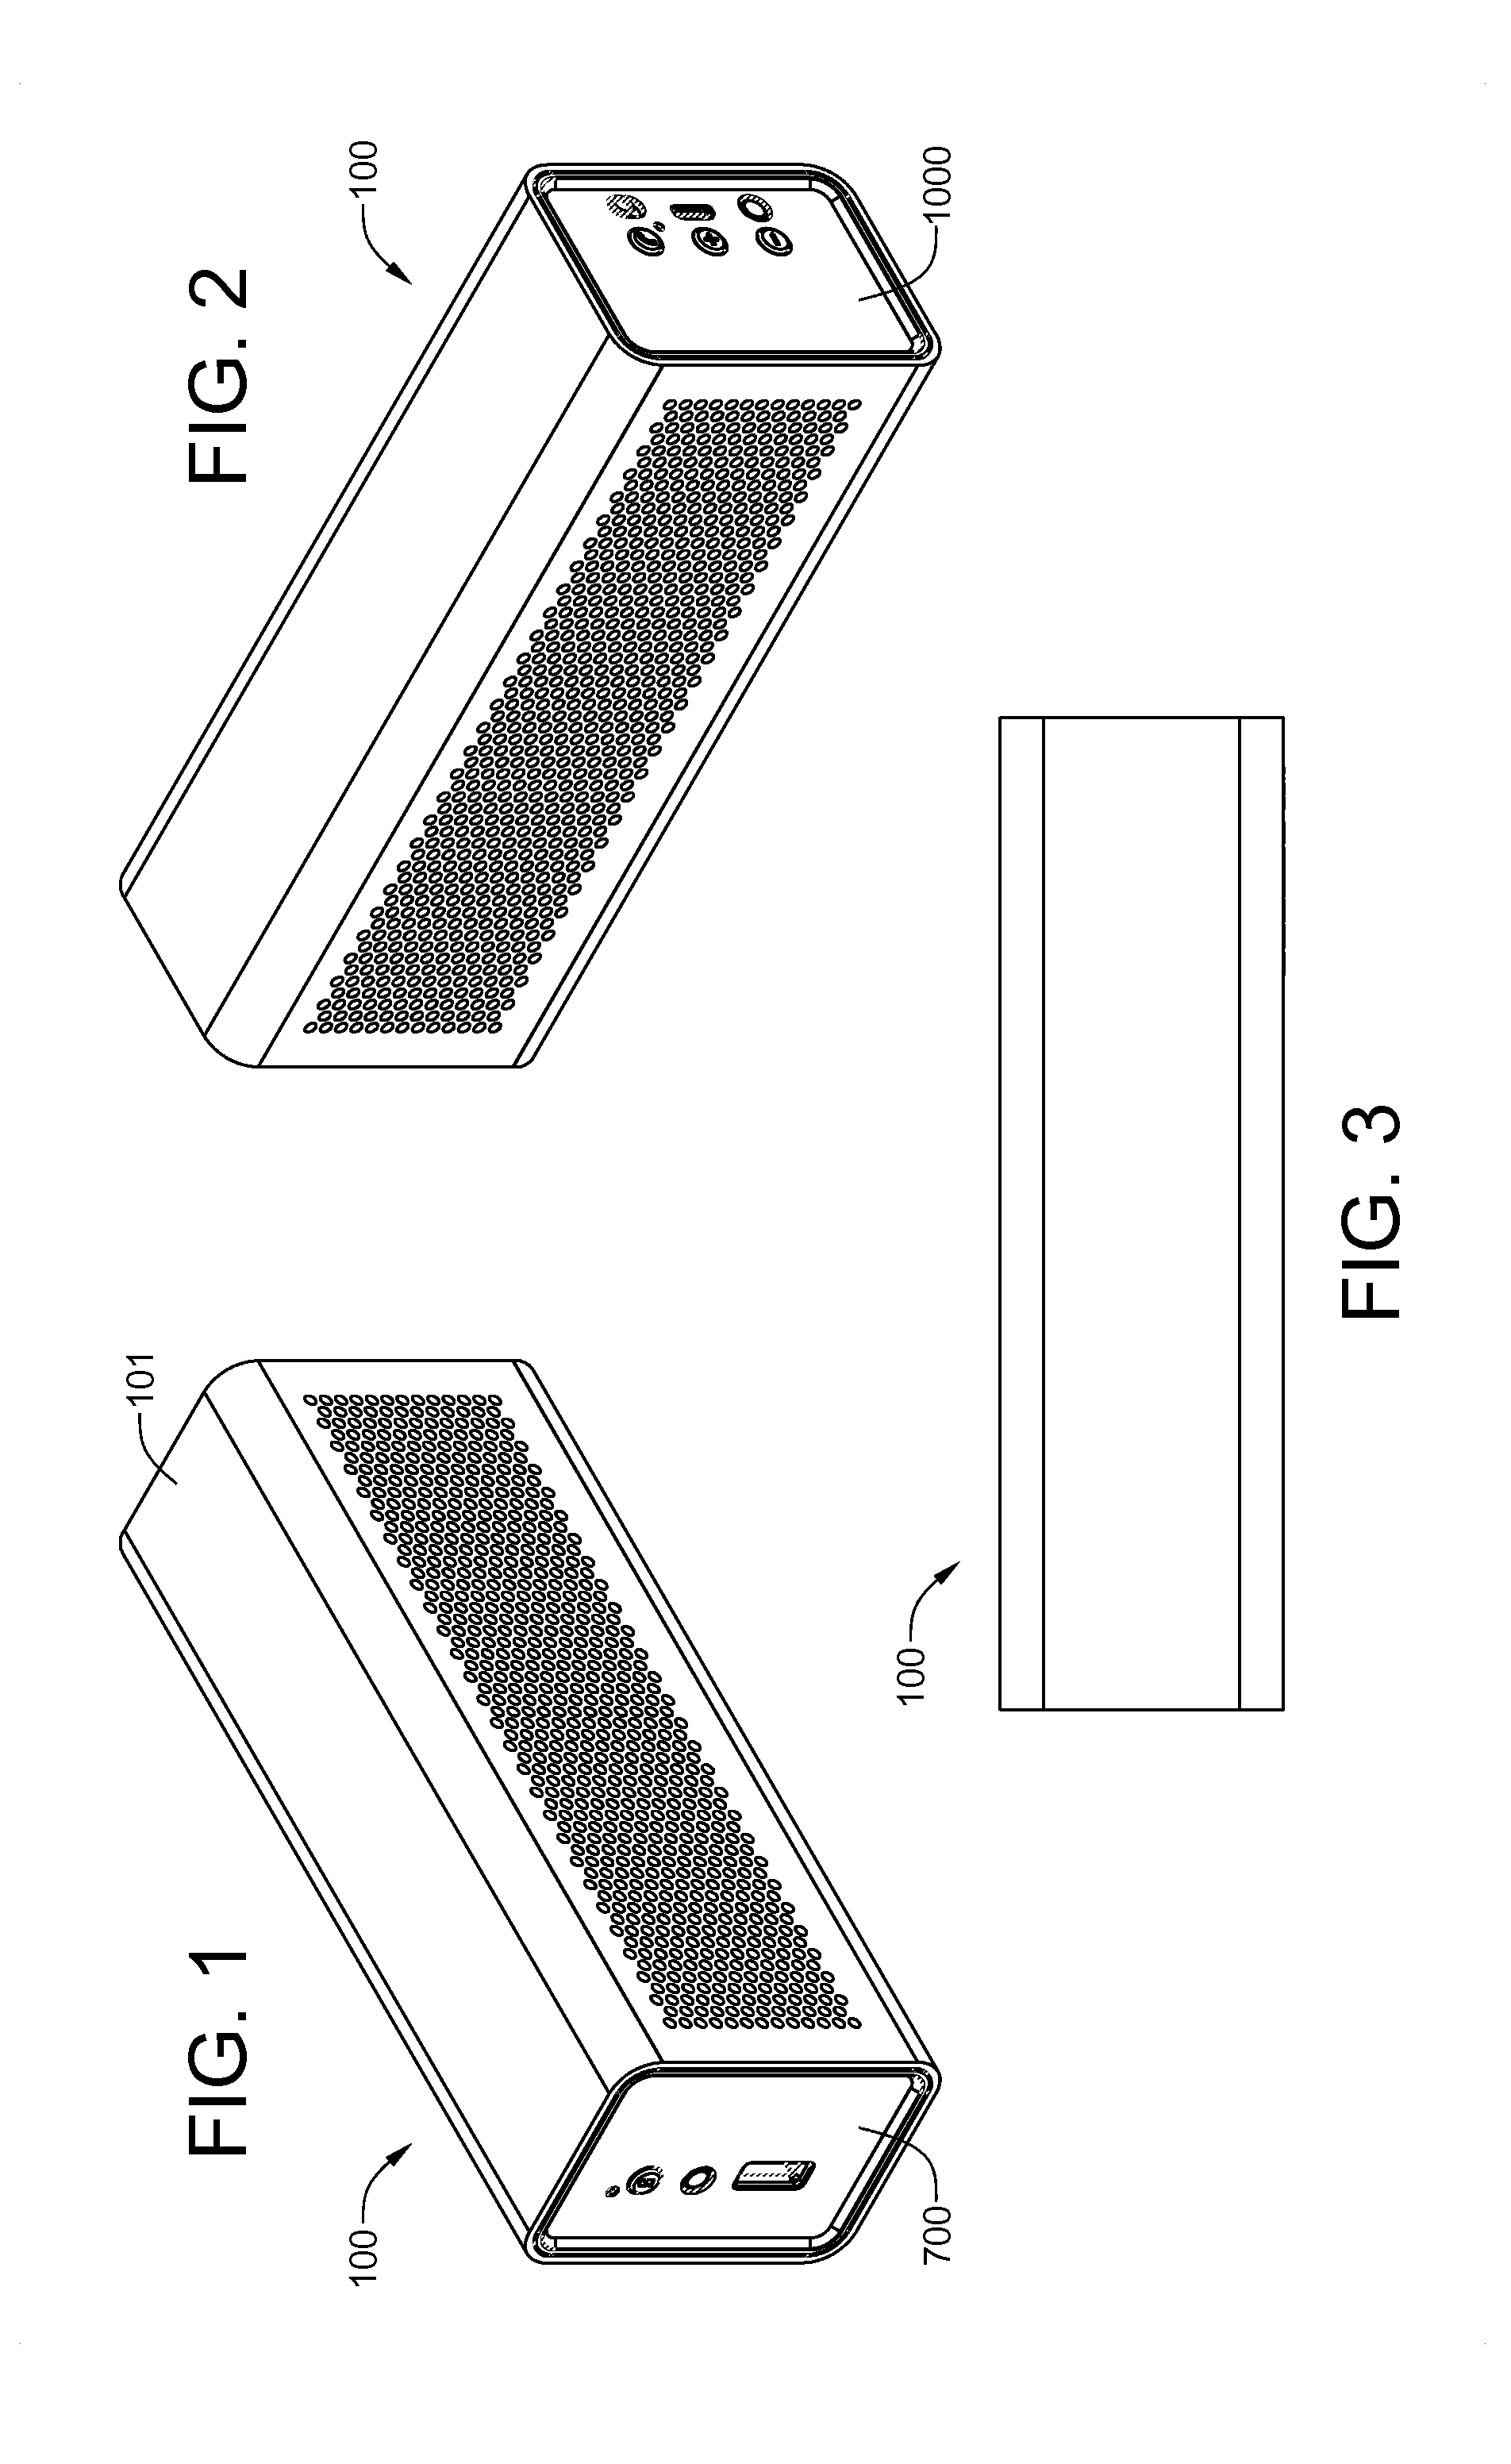 Battery-powered stereo speaker assembly having power connection for charging a handheld device